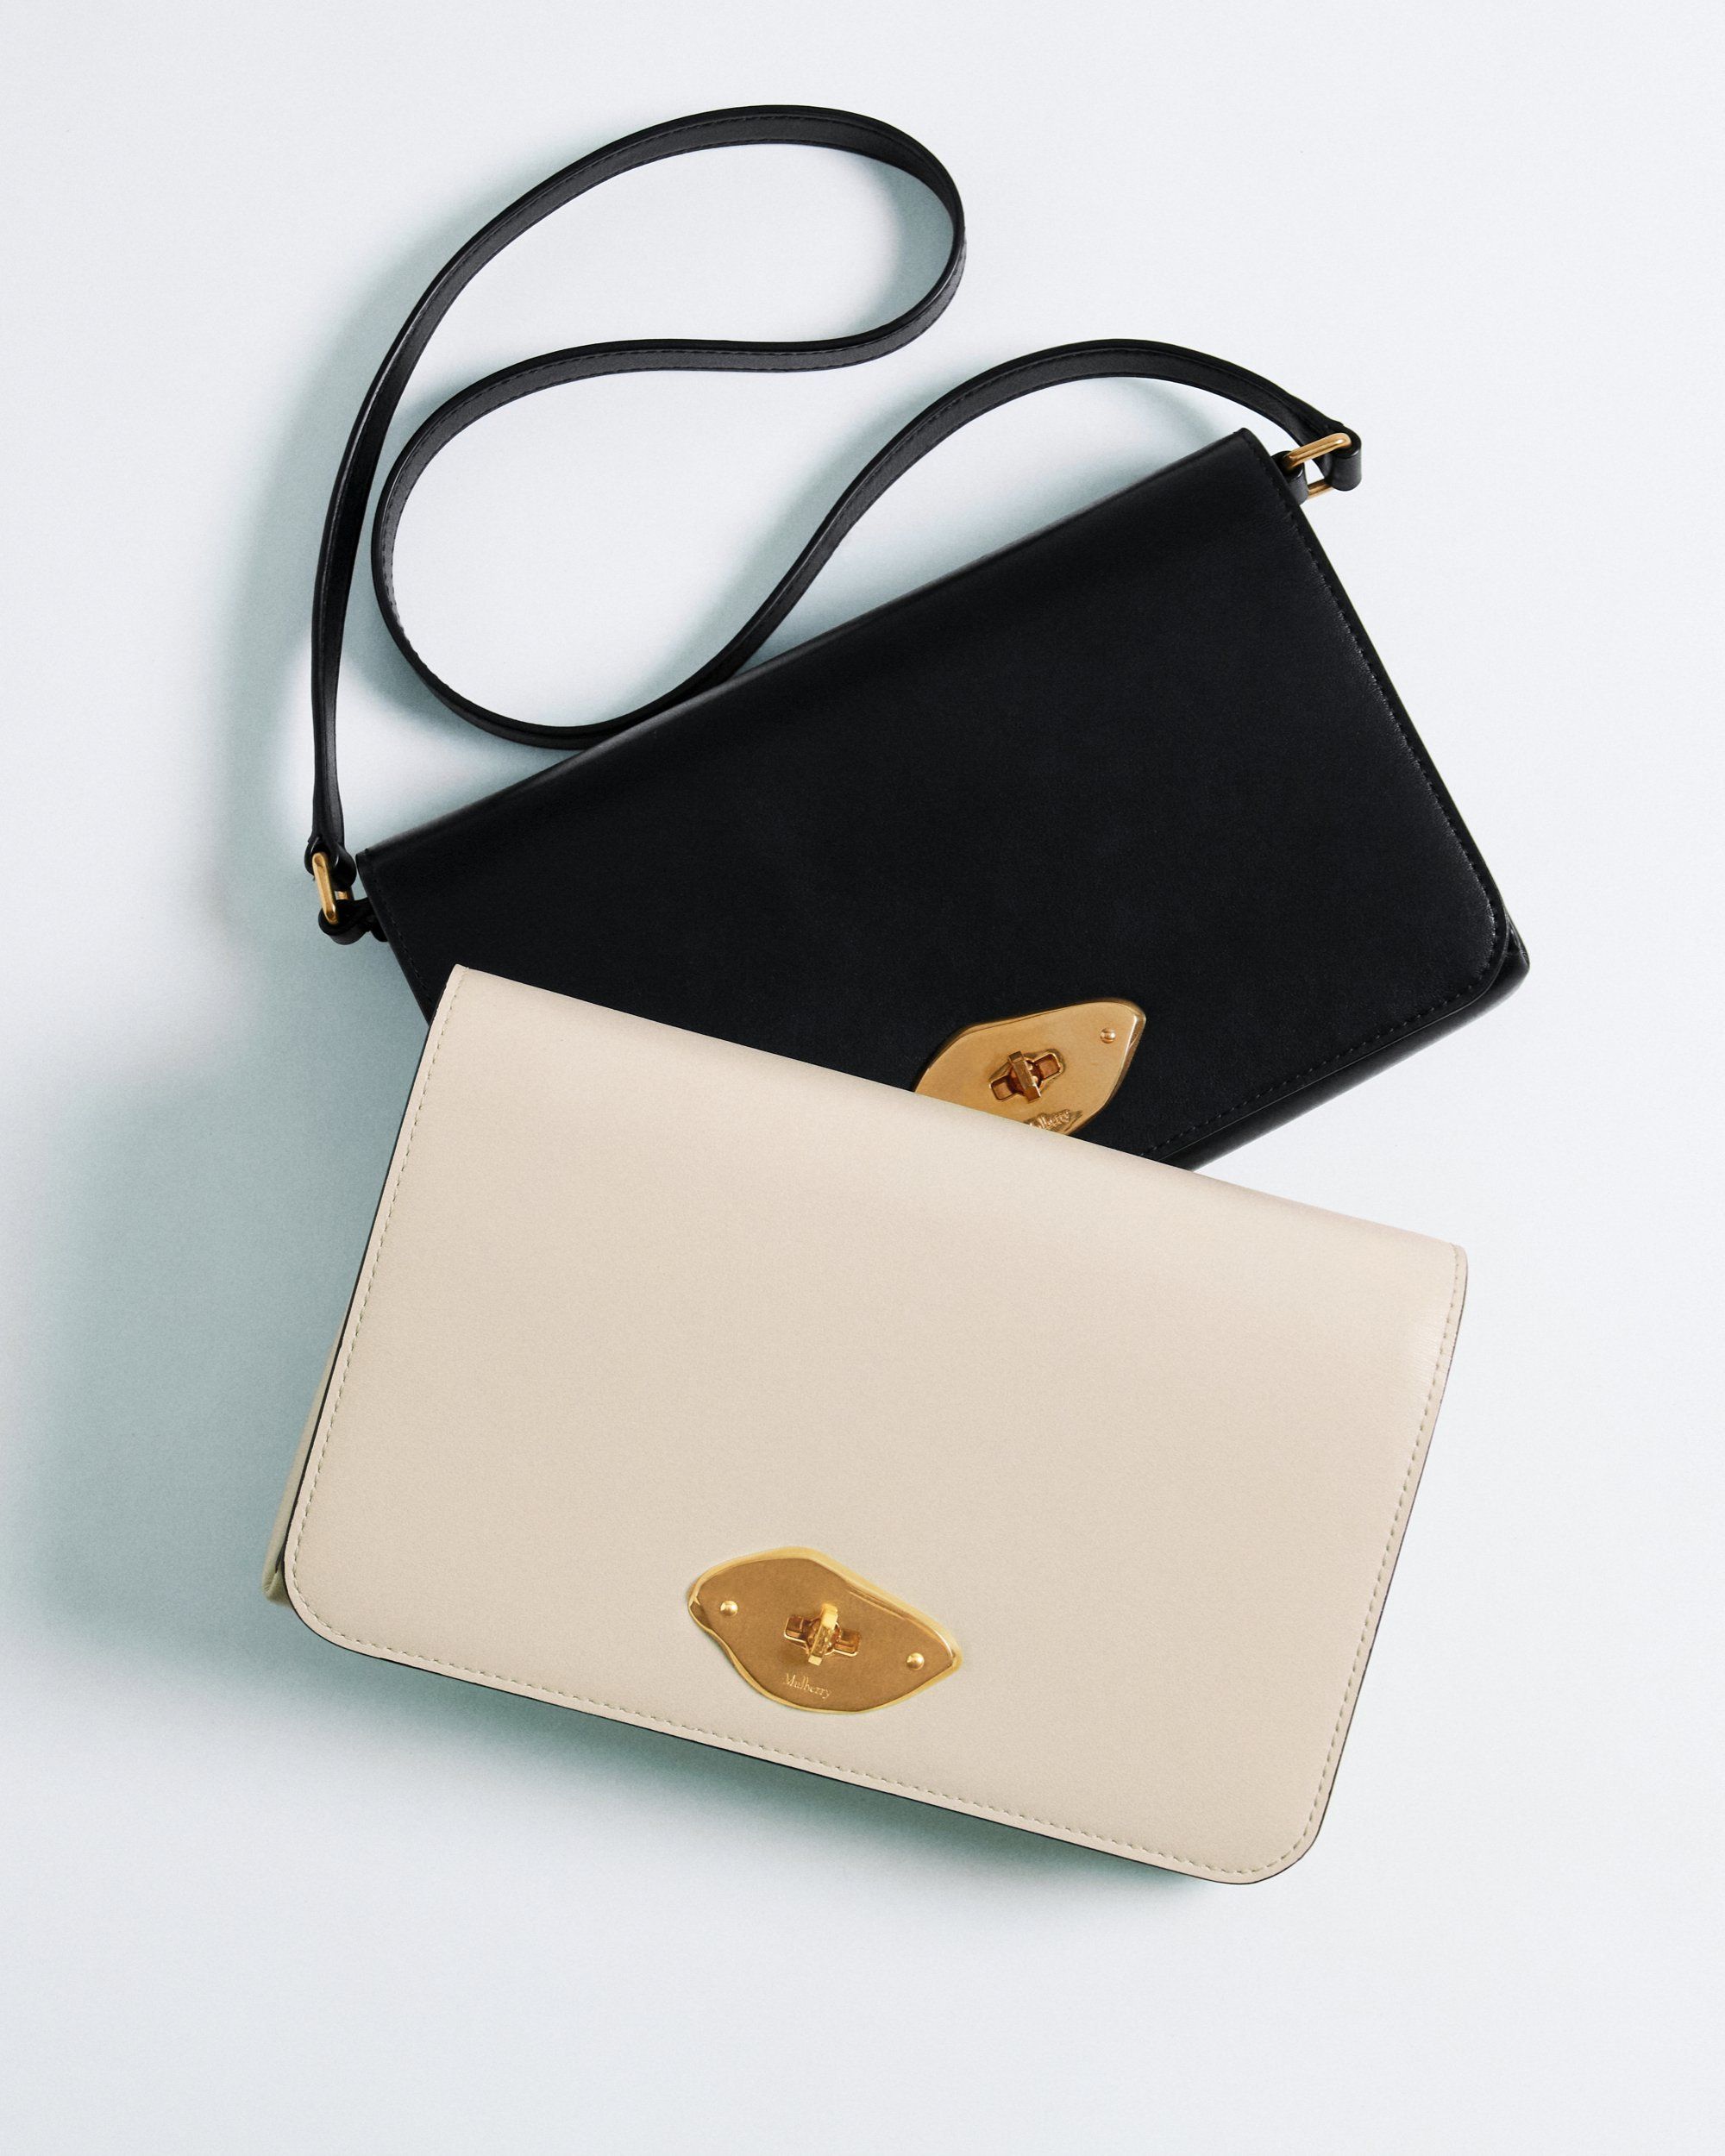 Duo of Mulberry Lana Wallet on Strap bags in Eggshell and black